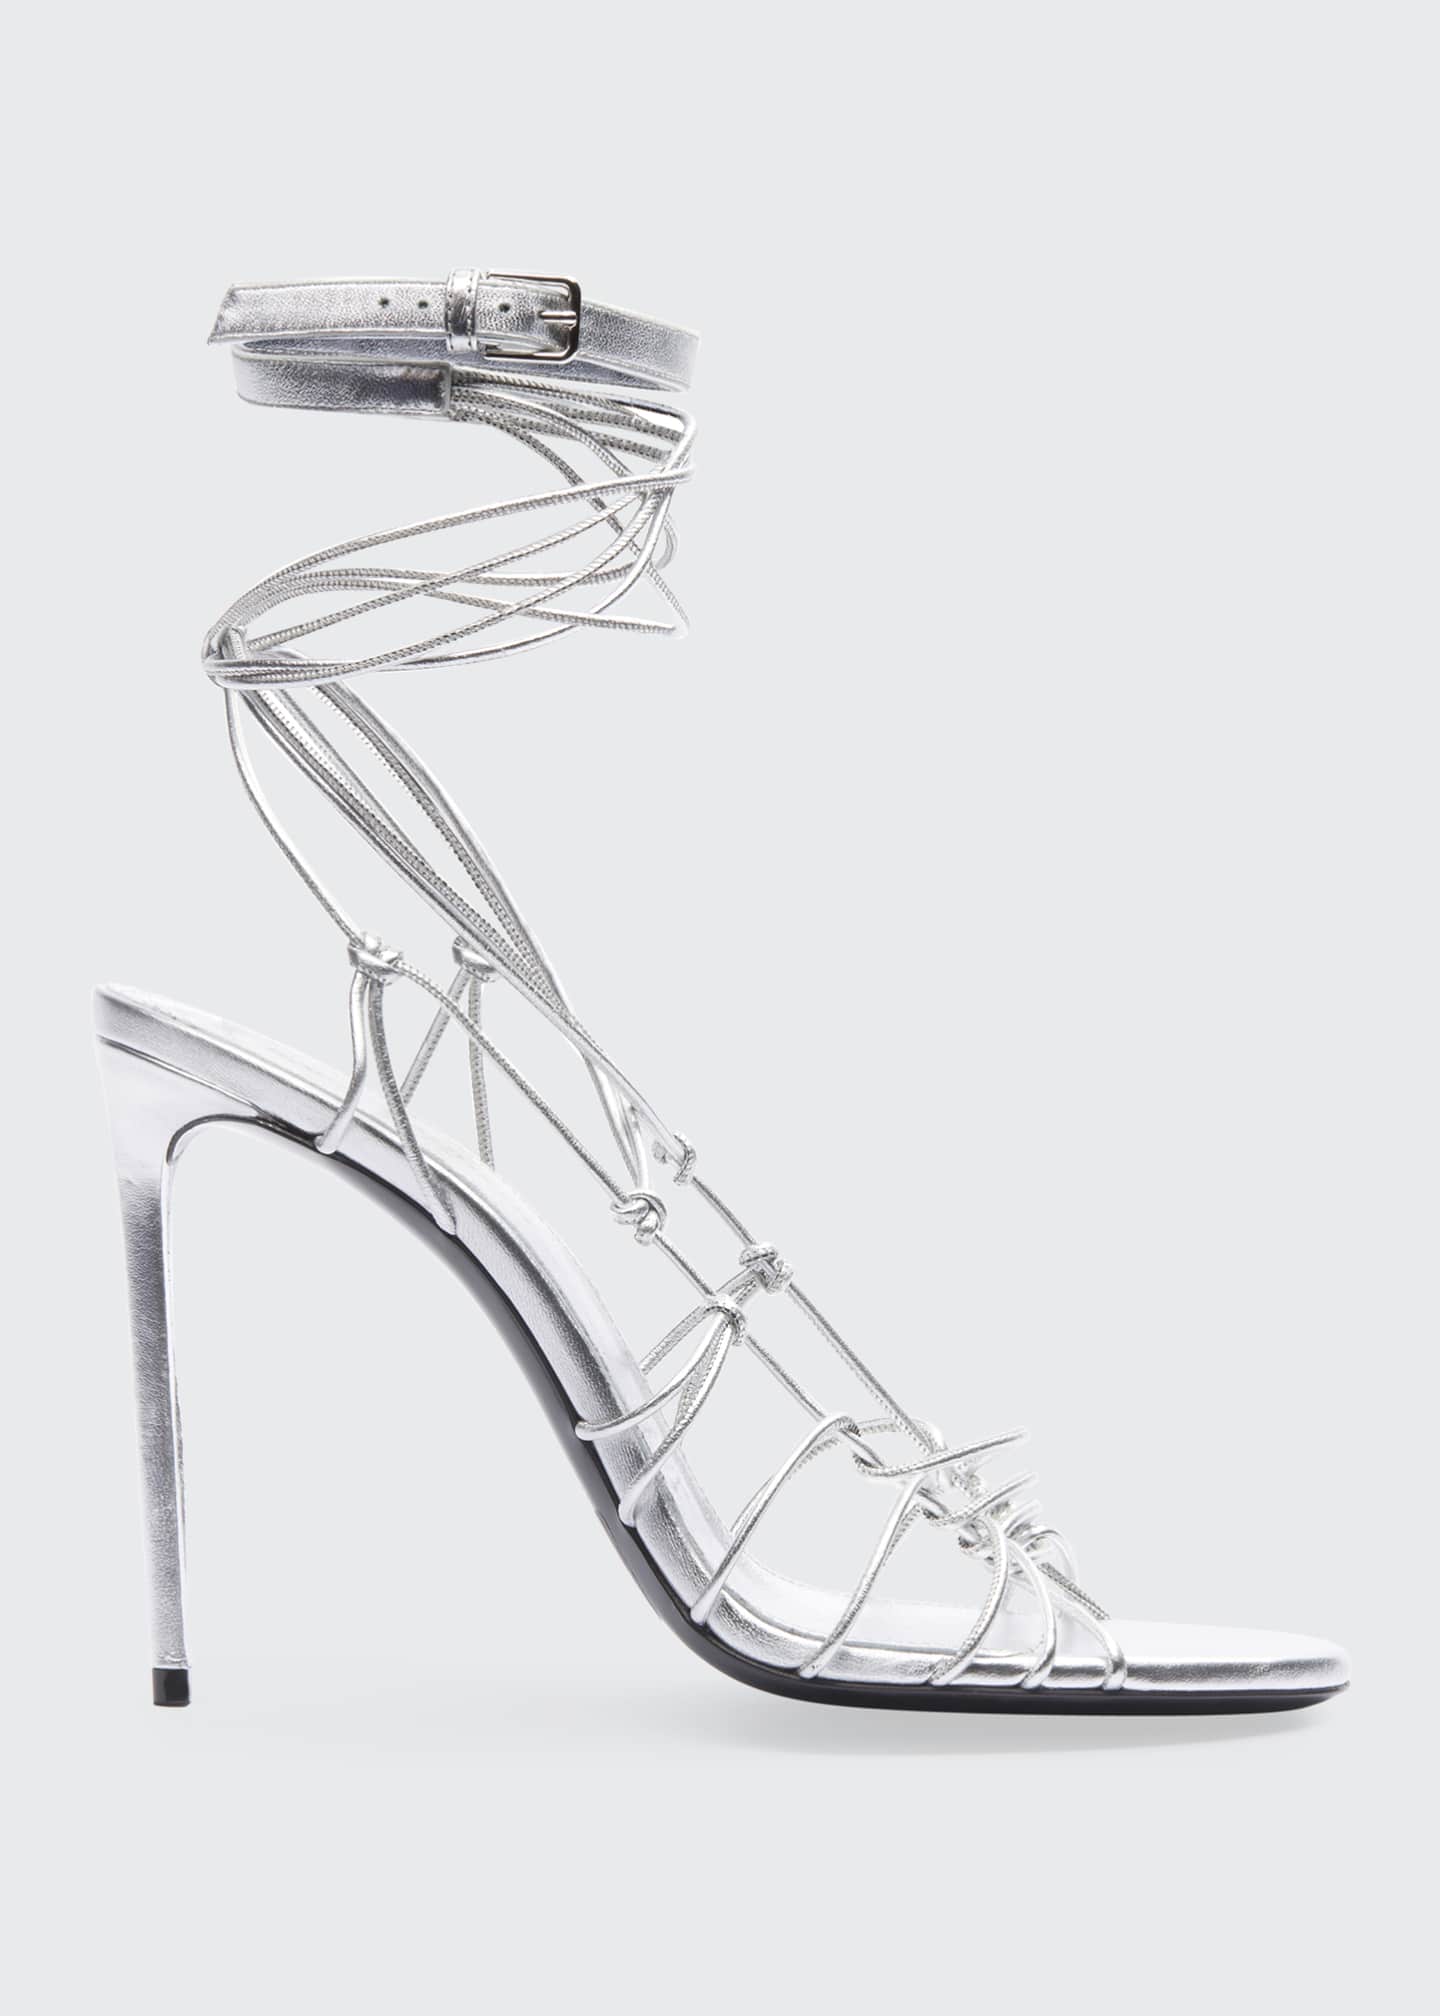 ysl strappy shoes